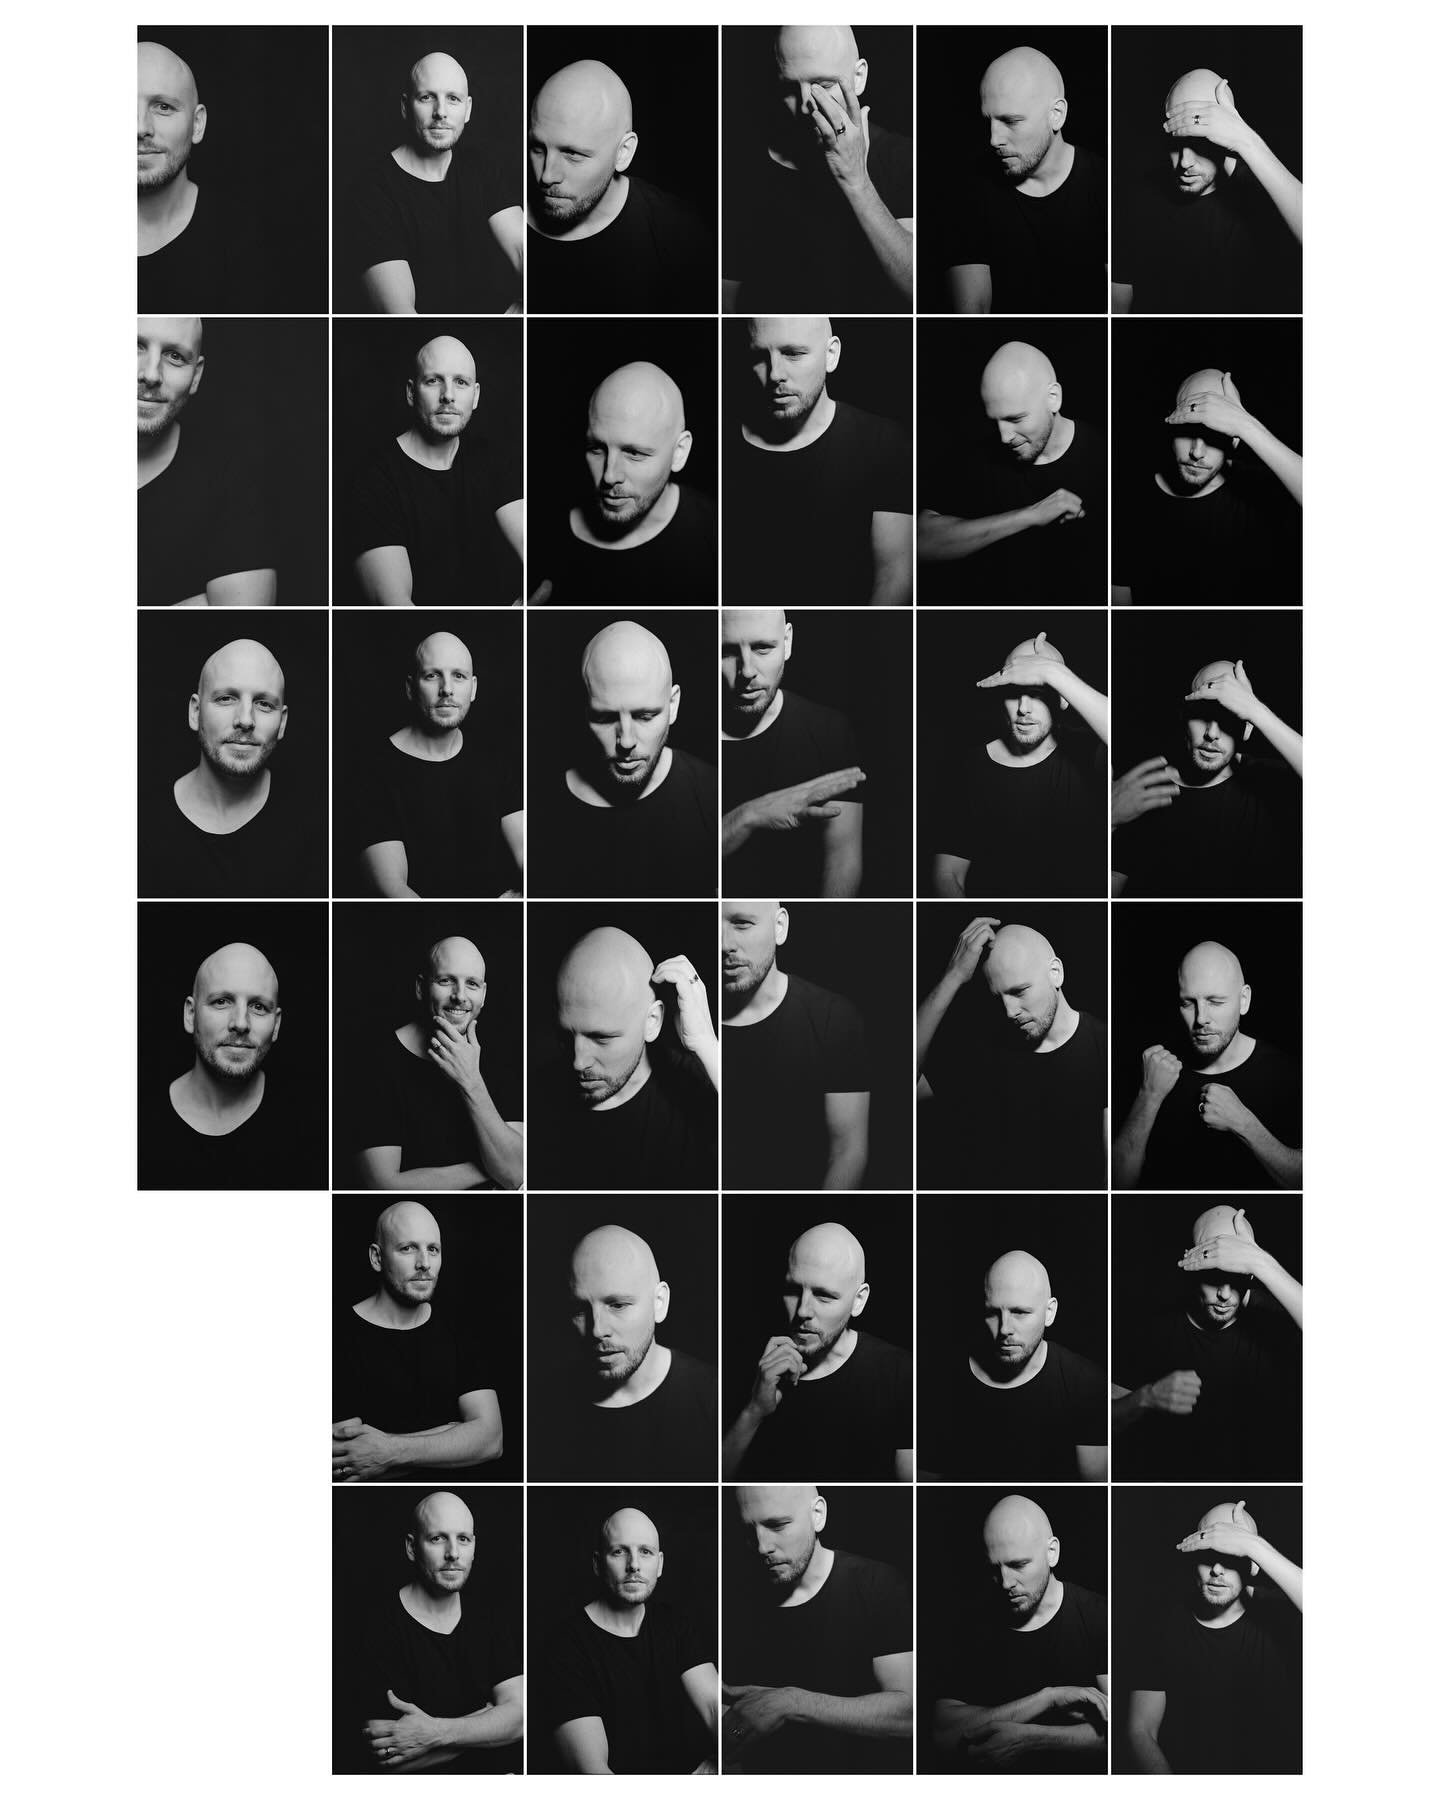 Photographic portraits of Andr&eacute; telling me his story.